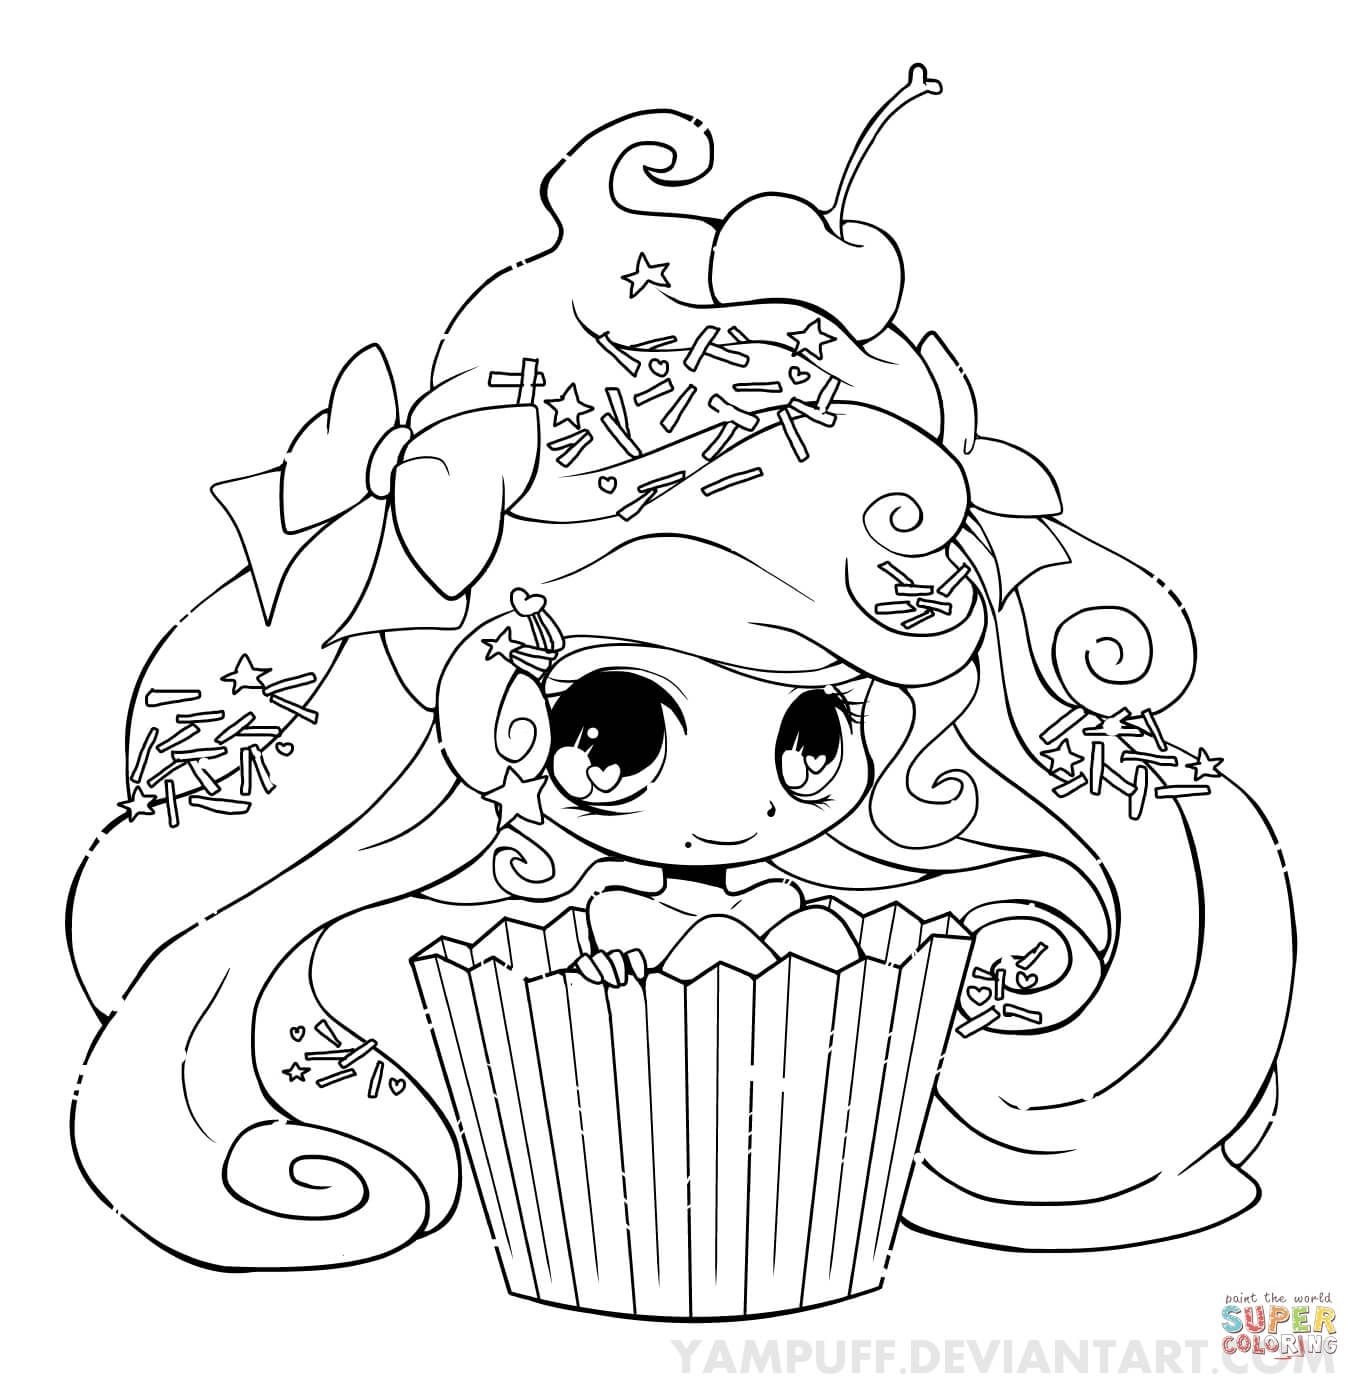 Cute Girl Coloring Pages Coloring Chibi Cupcake Girl Coloring Page From Anime Girls